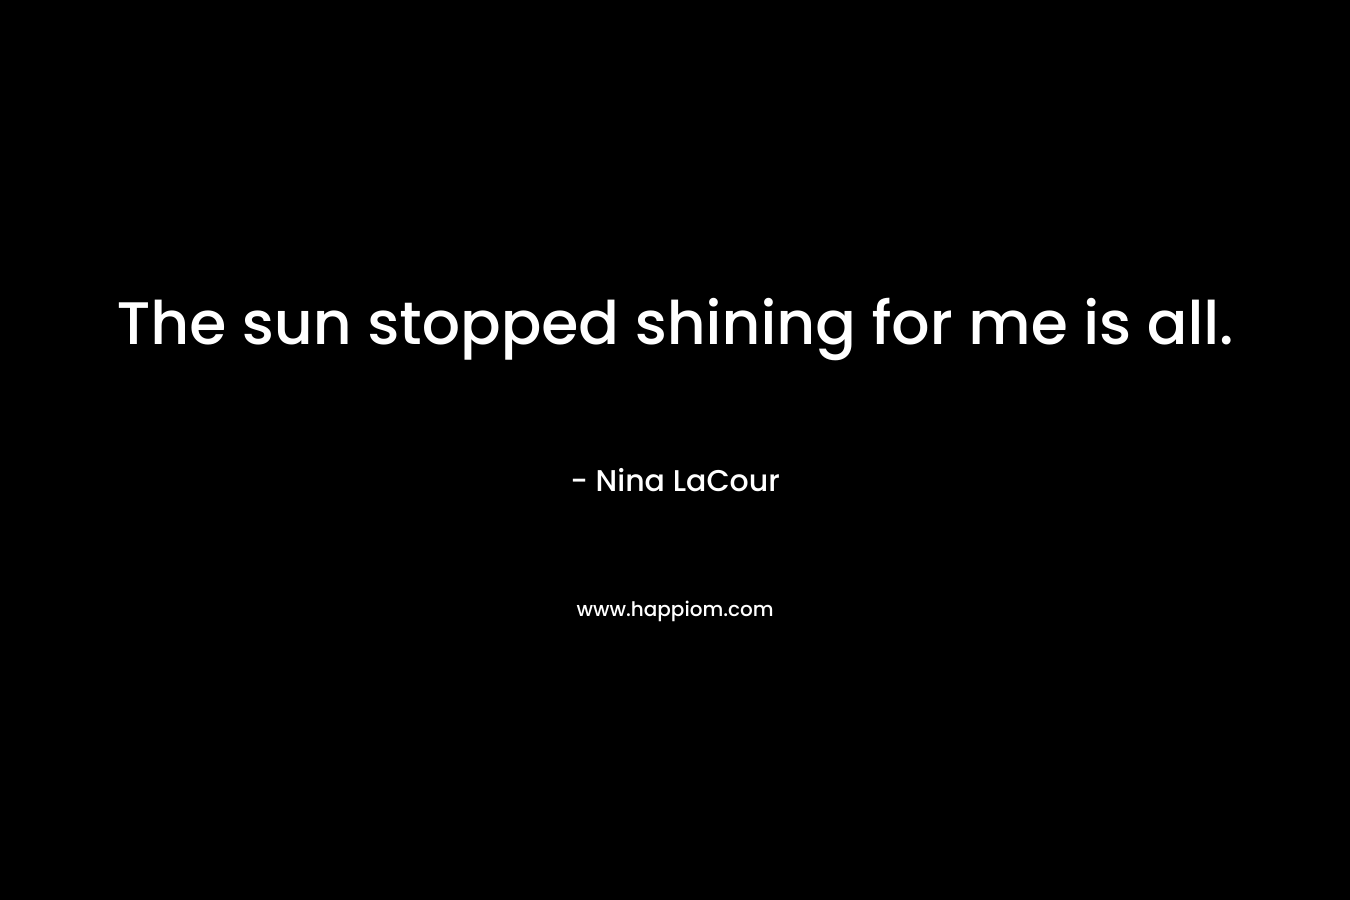 The sun stopped shining for me is all. – Nina LaCour